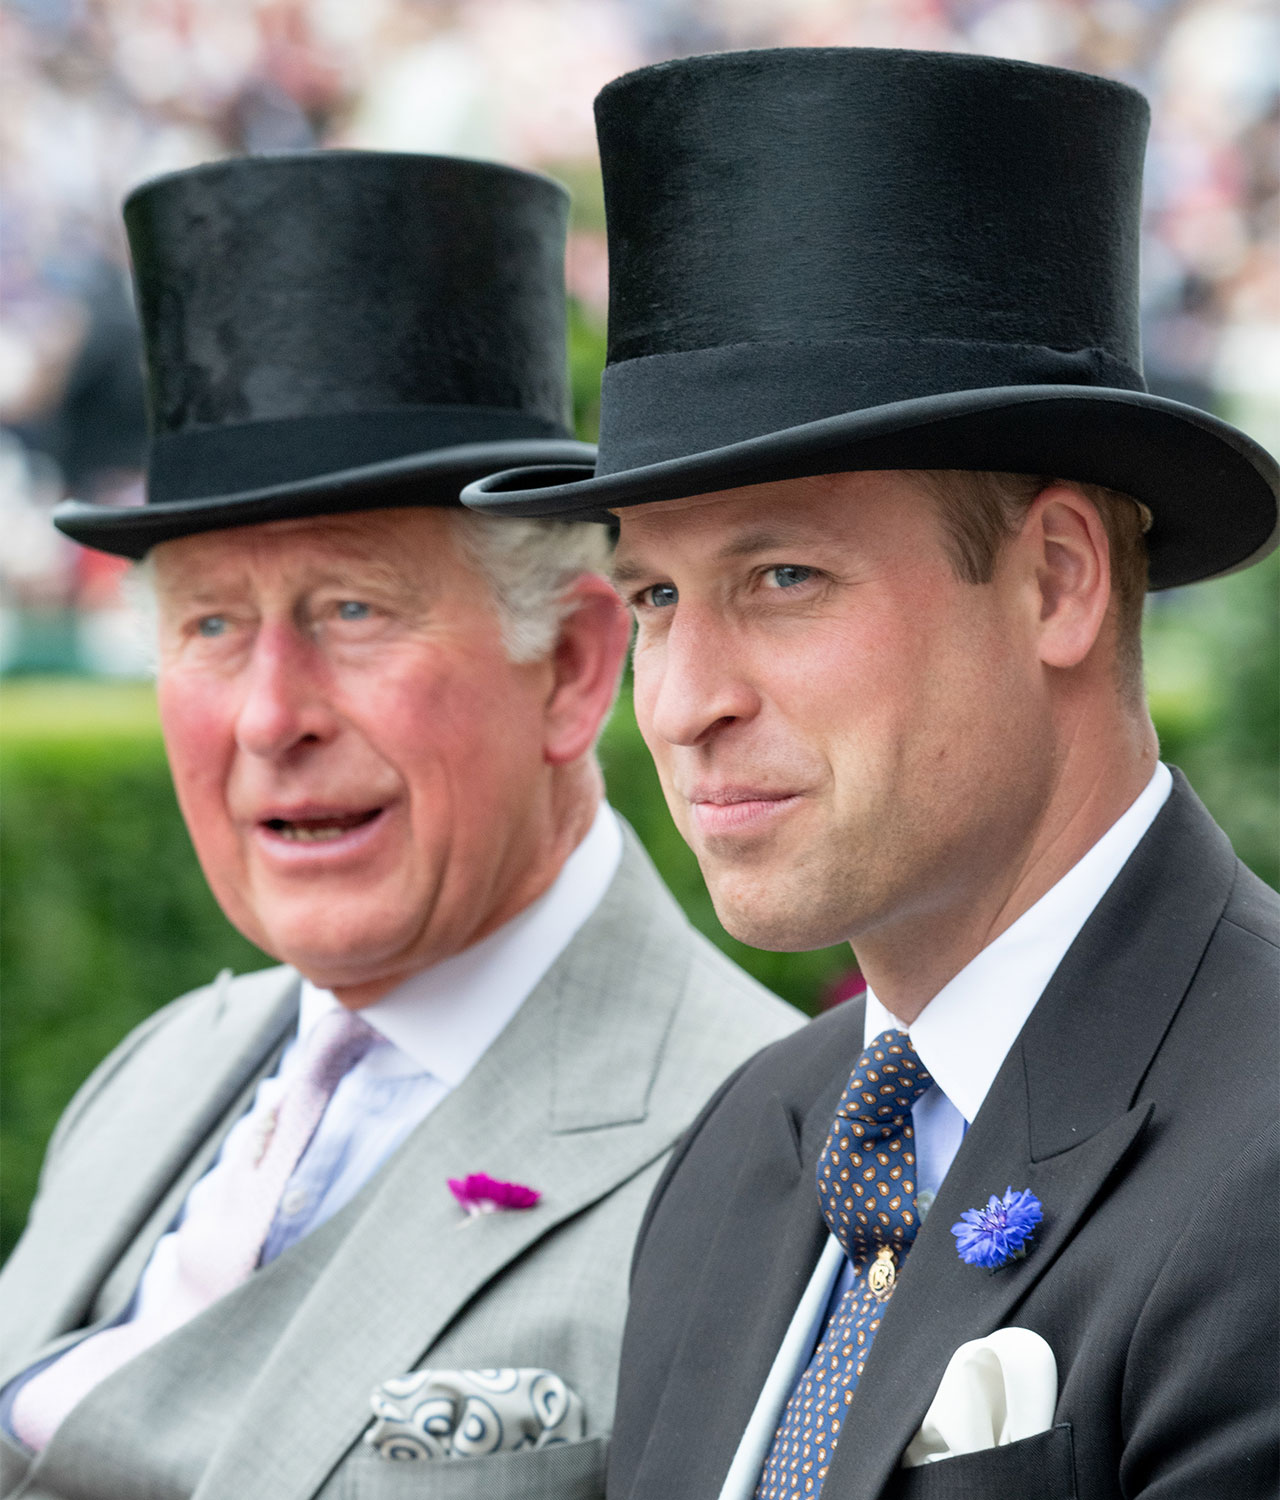 Prince William King Charles wearing hats